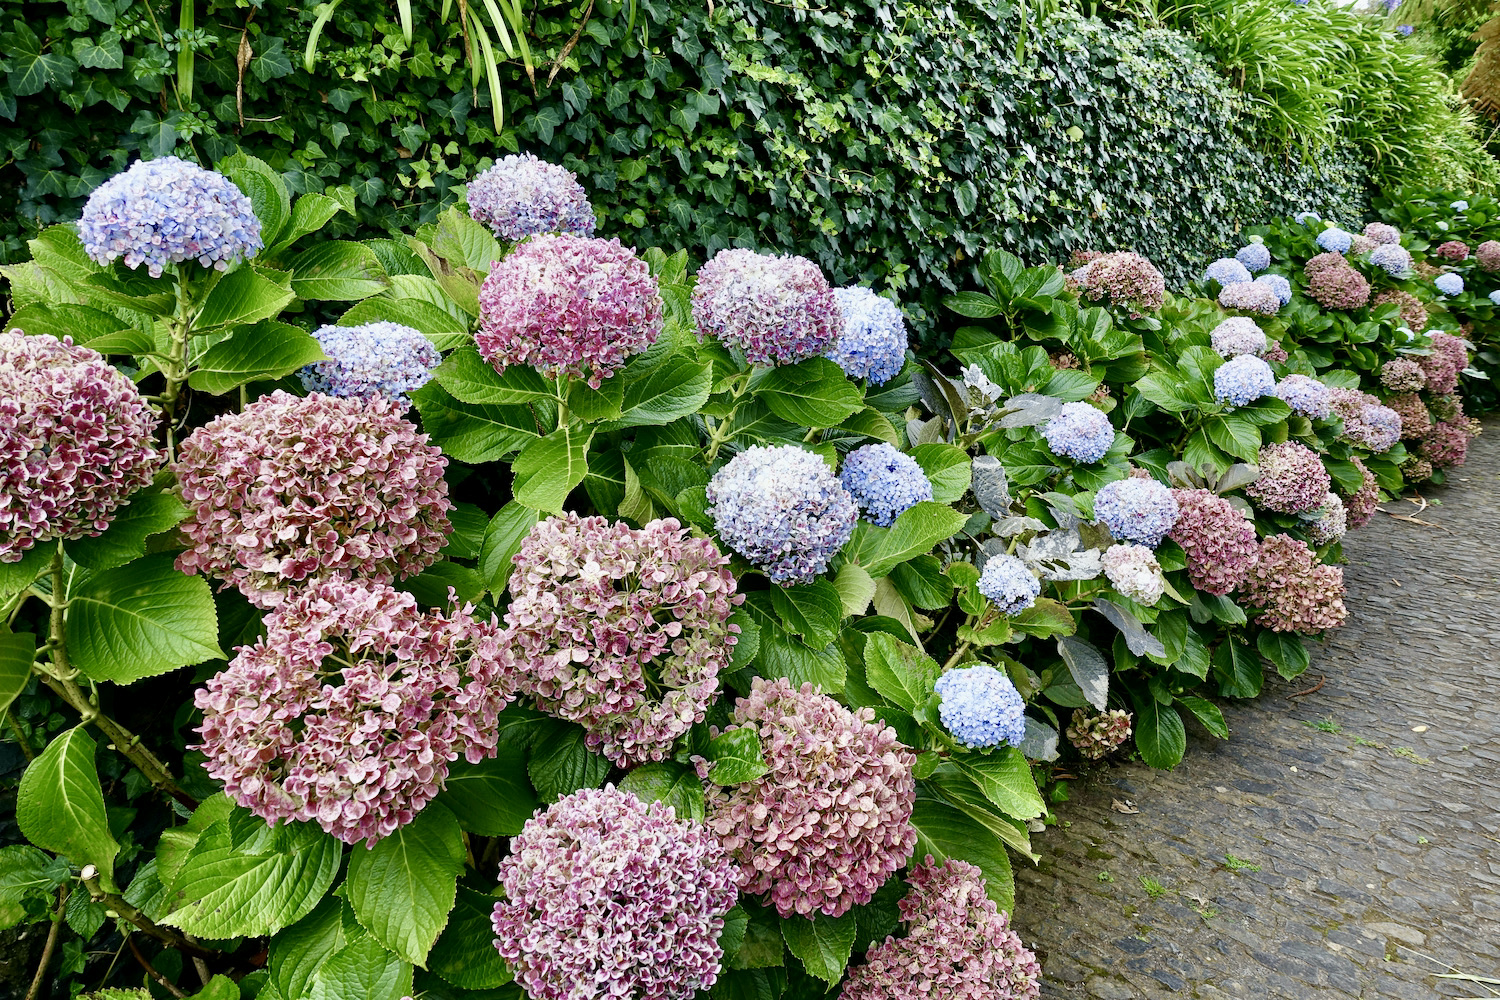 hydrangea at Monte Palace Tropical Gardens Funchal, Madeira